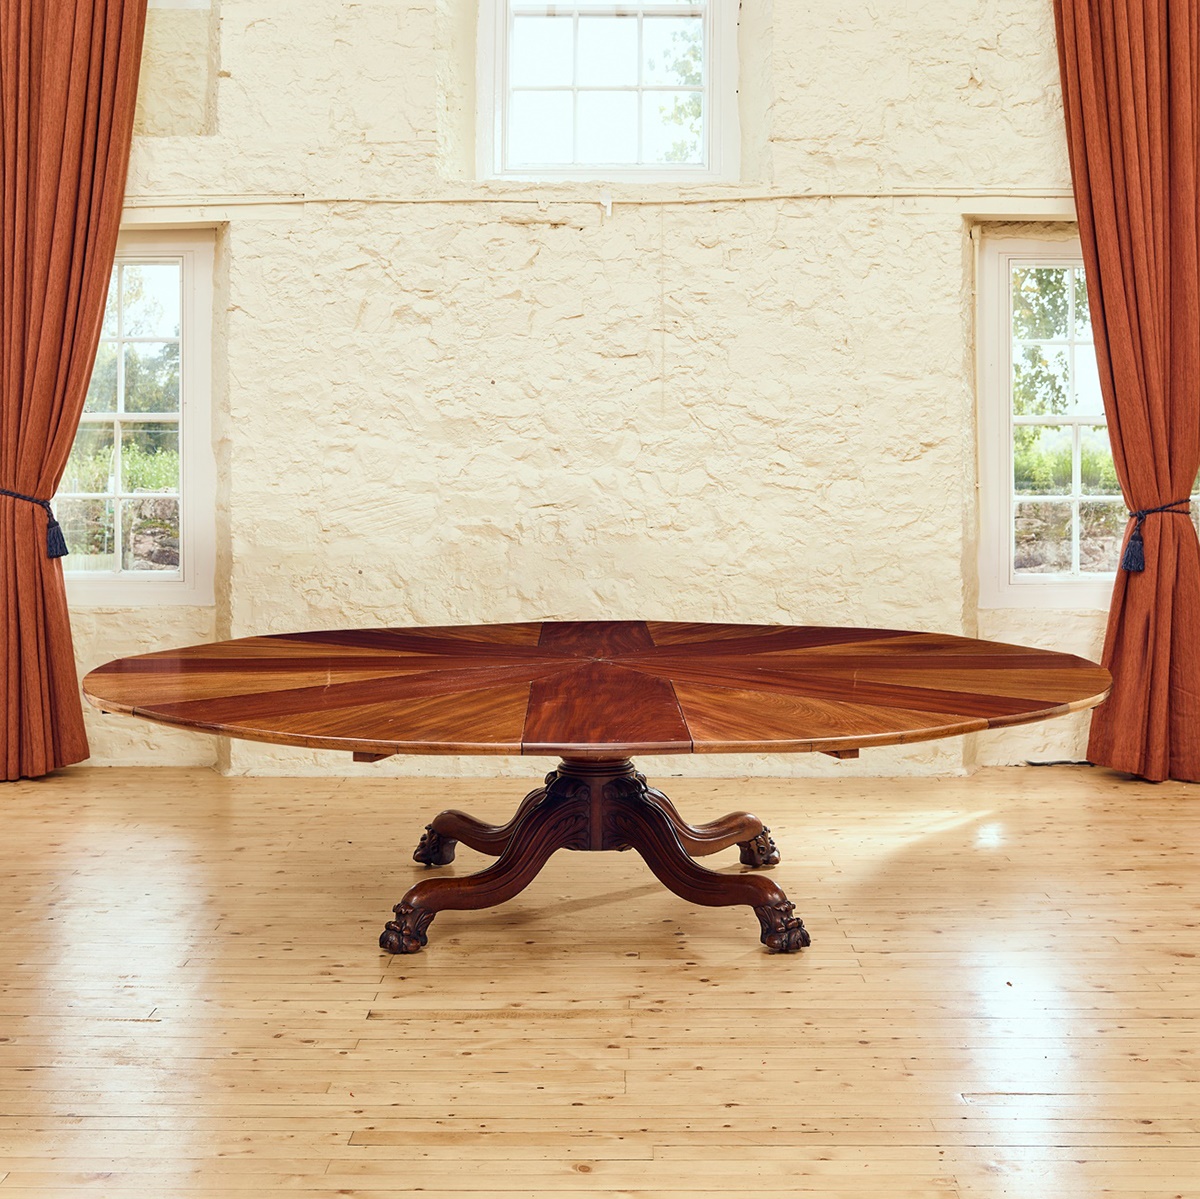 WILLIAM IV MAHOGANY 'JUPE'S PATENT' EXTENDING DINING TABLE, BY JOHNSTONE, JUPE & CO. CIRCA 1835-40